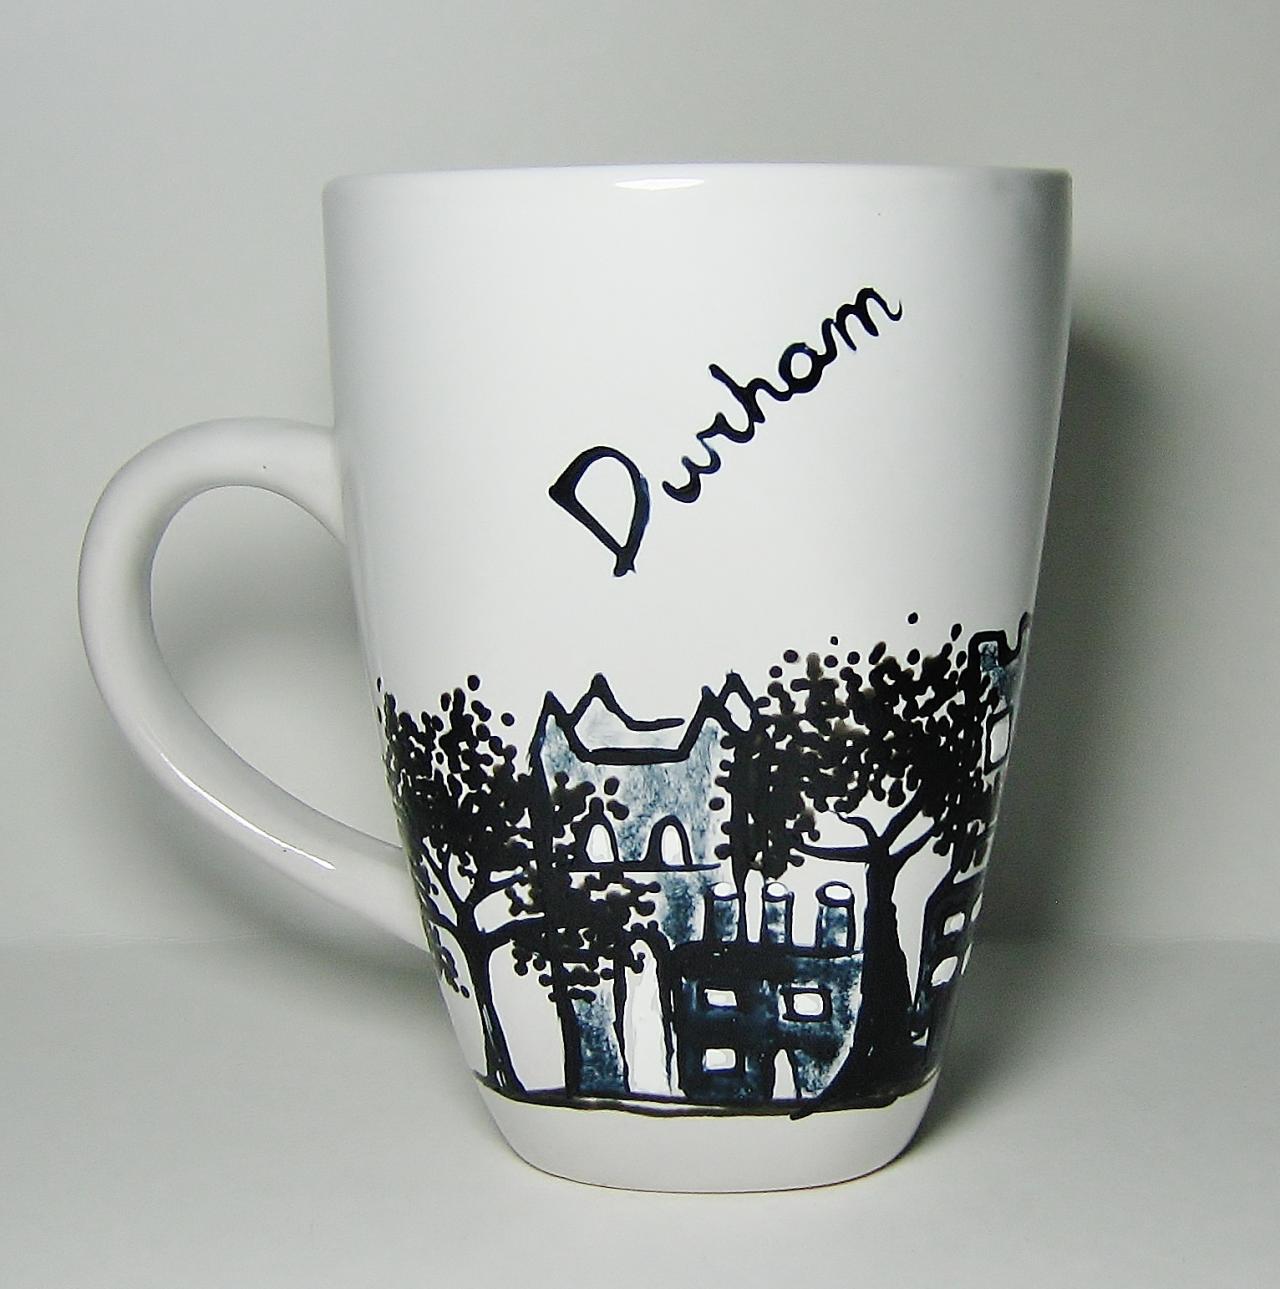 Long Distance Relationship Durham England - Mother's Day Gift